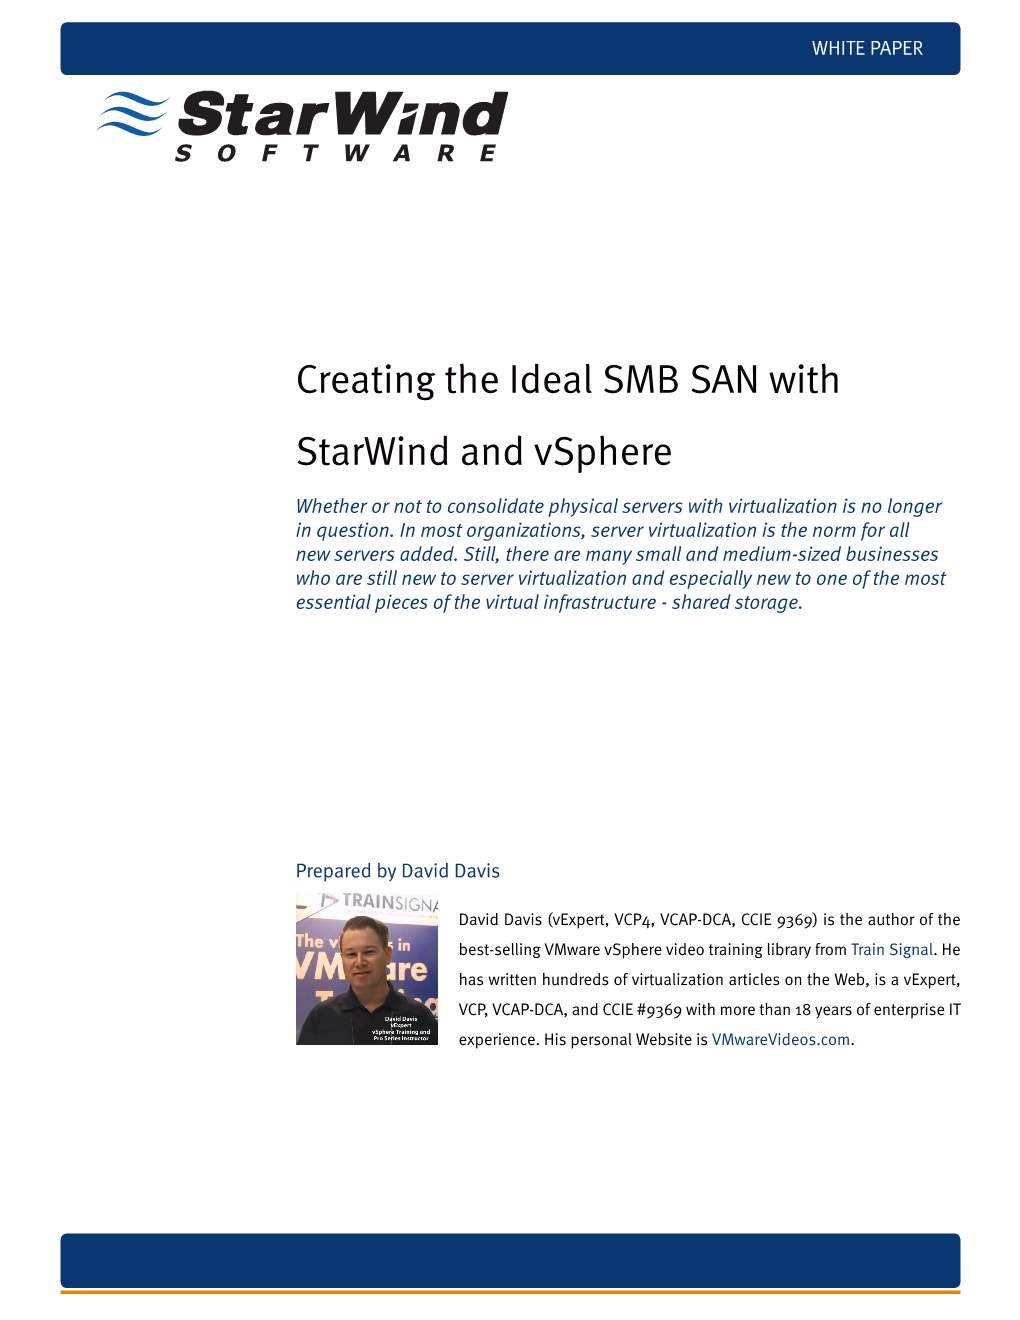 Creating the Ideal SMB SAN with Starwind and Vsphere